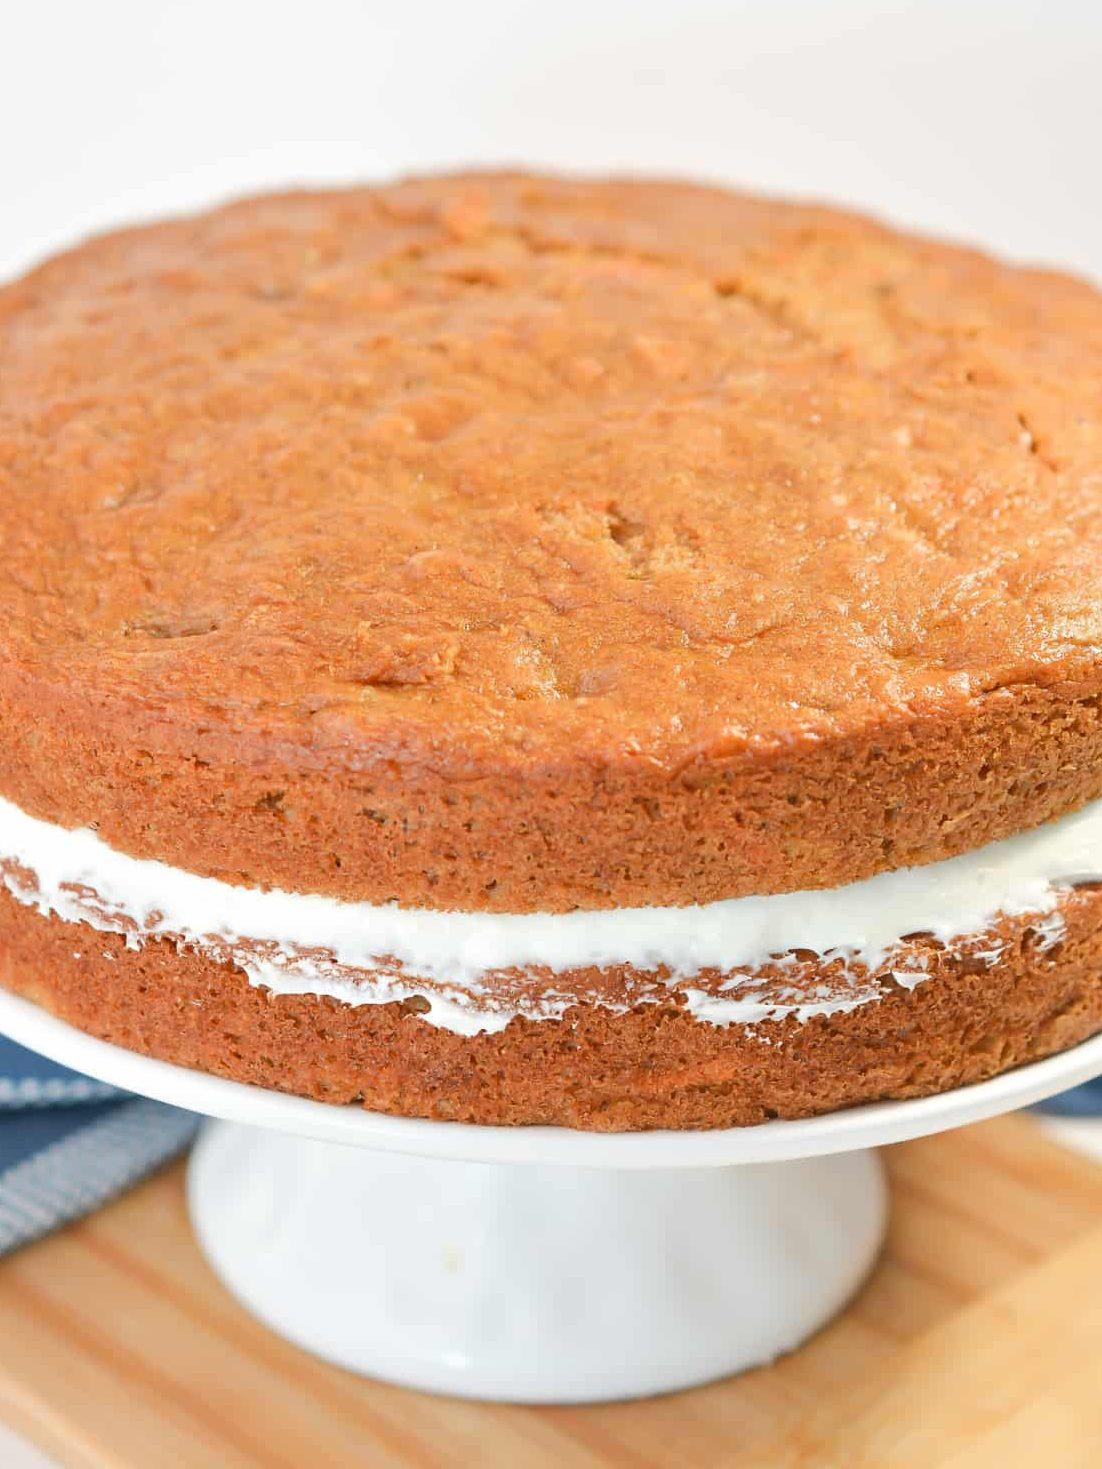 Put the second layer of cake on top, and then ice the top and sides of the cake.